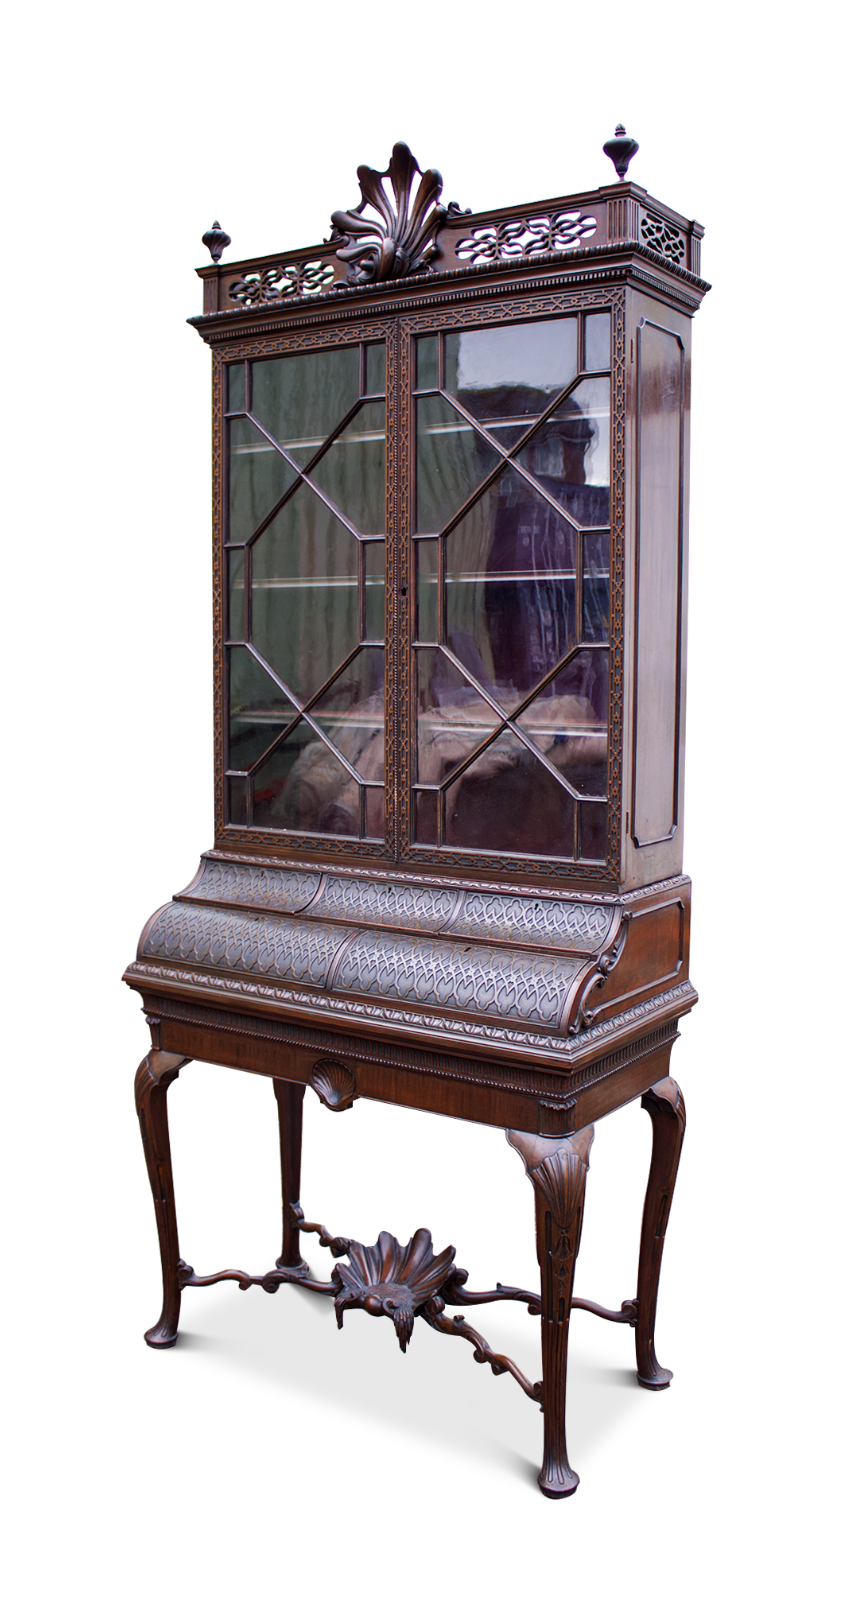 Antique Cabinet Stunning Quality Edwardian Carved Mahogany Cabint On Stand